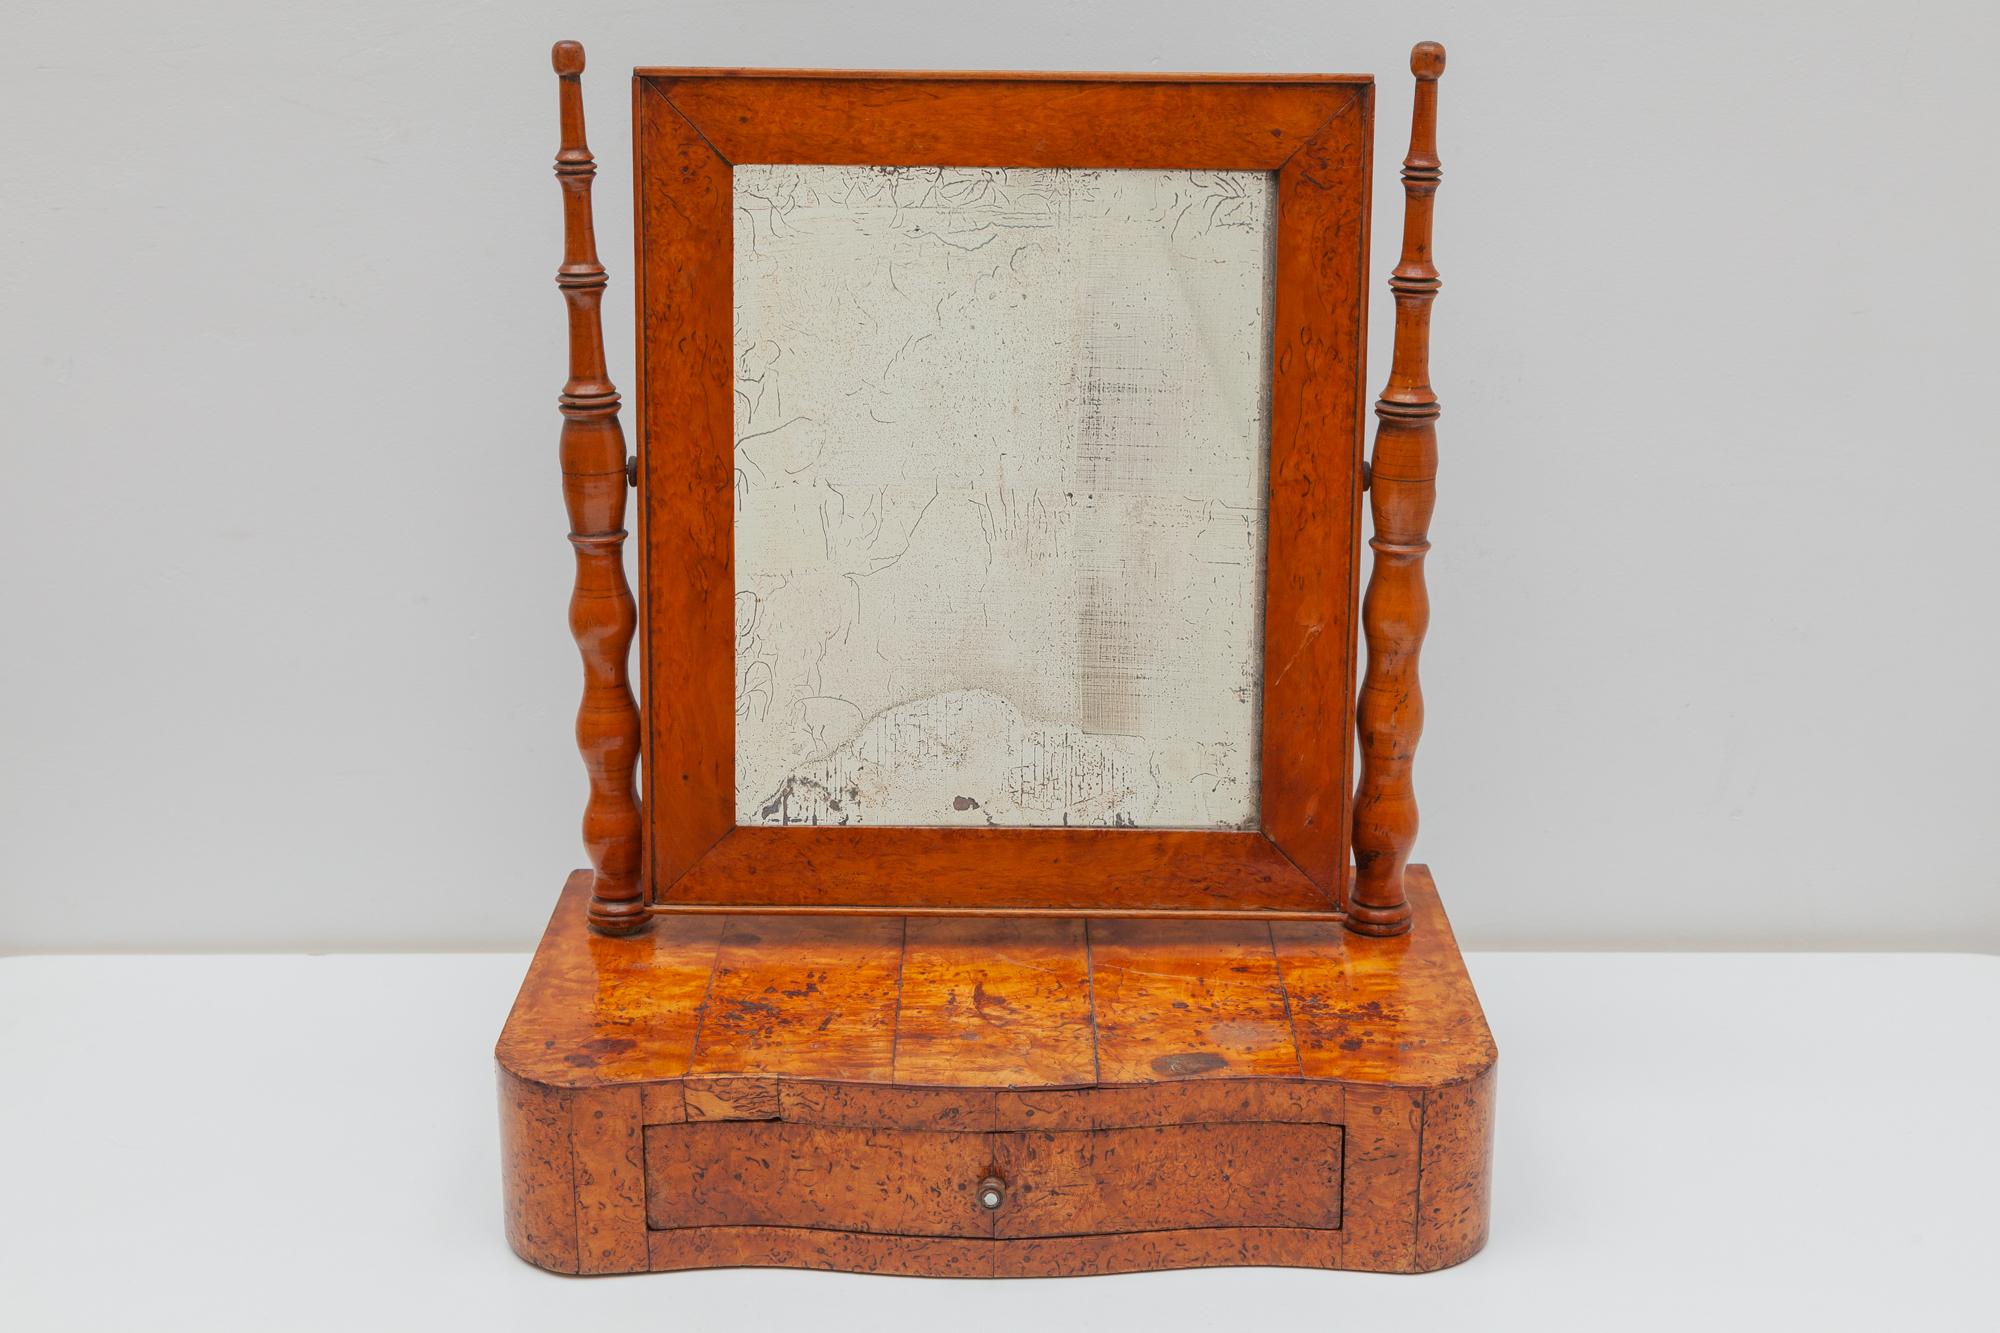 Beautiful 19th century Biedermeier vanity table mirror from the second period in Austria, circa 1850. The lovely vanity mirror was veneered in fine burl wood and shows a glossy shellac finish polished by hand. The still original mirror floats